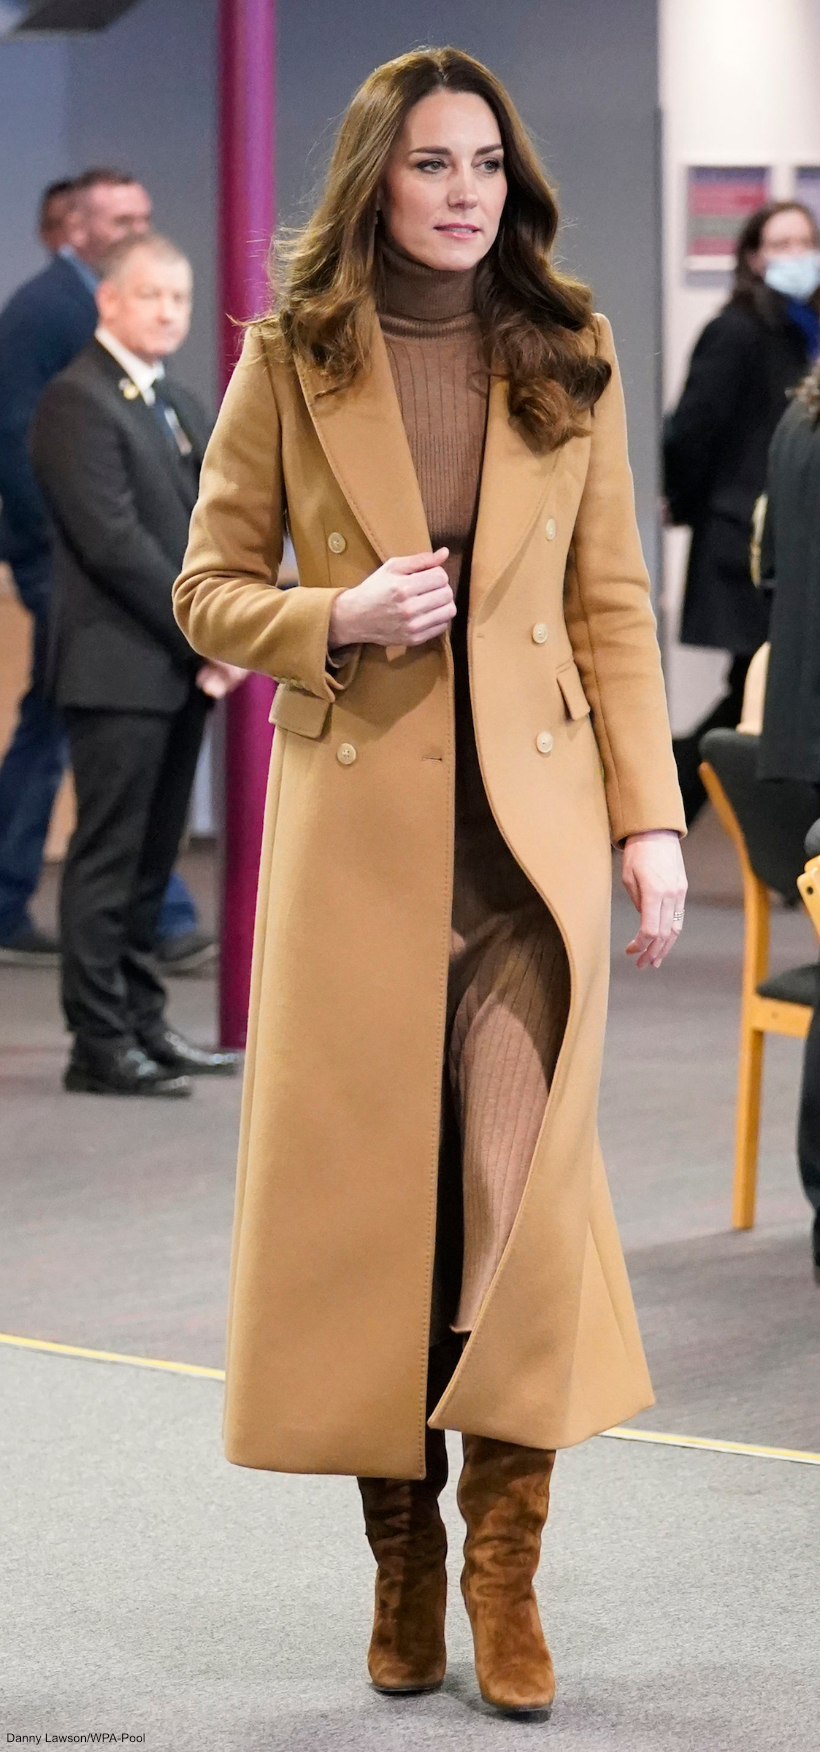 Kate Middeton's outfit in Lancashire 2022 - camel coat & matching skirt